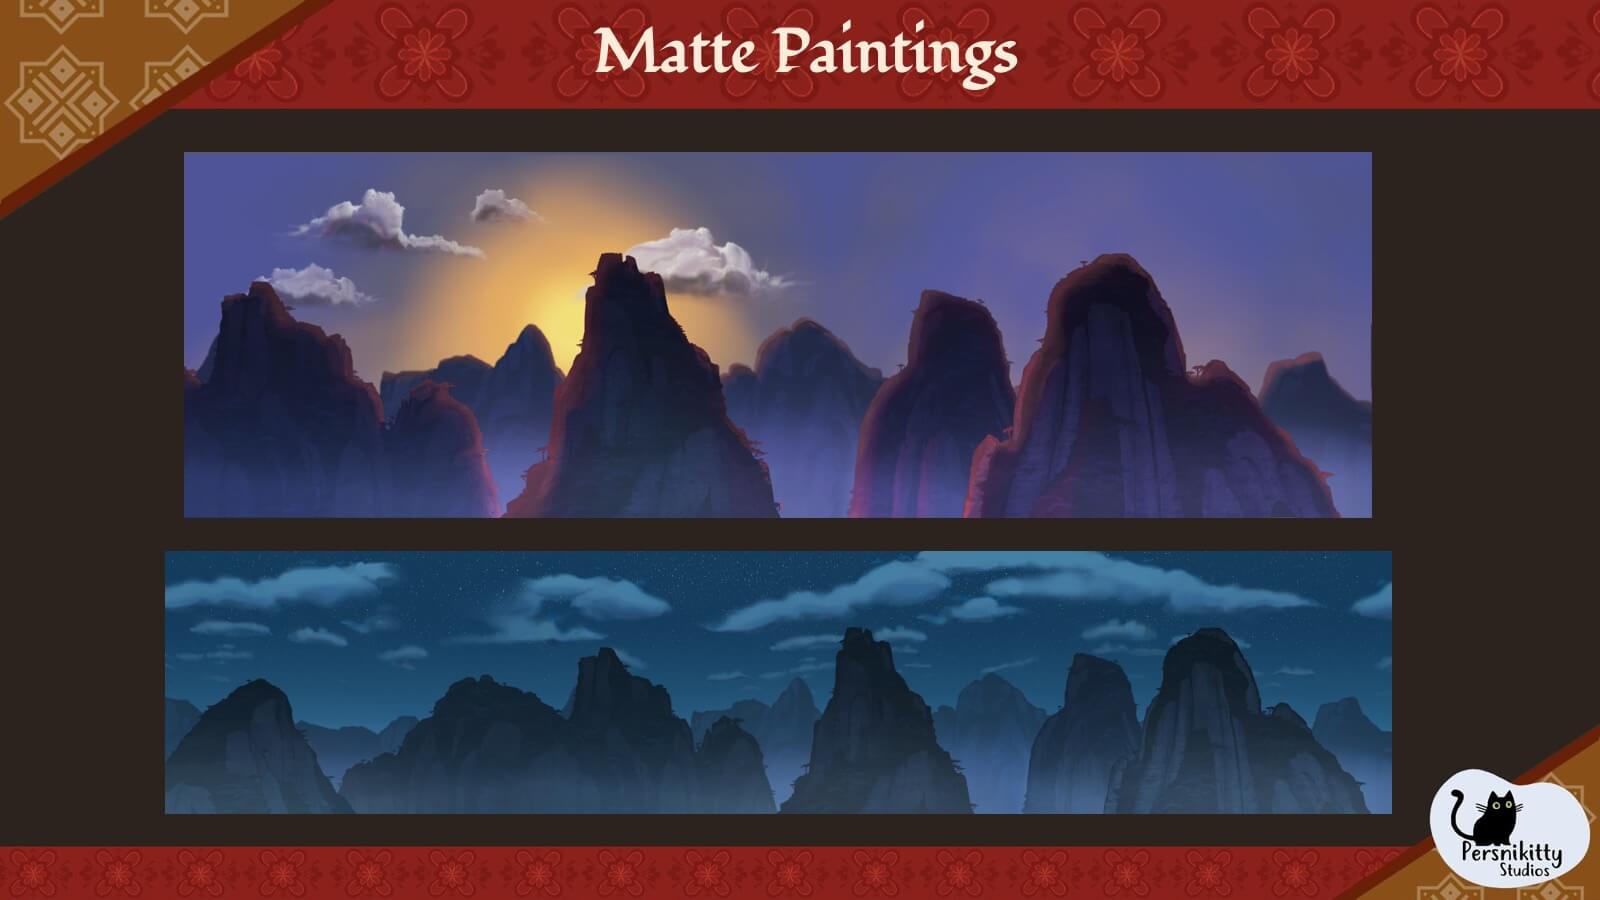 A slide featuring matte paintings for the film's backgrounds.